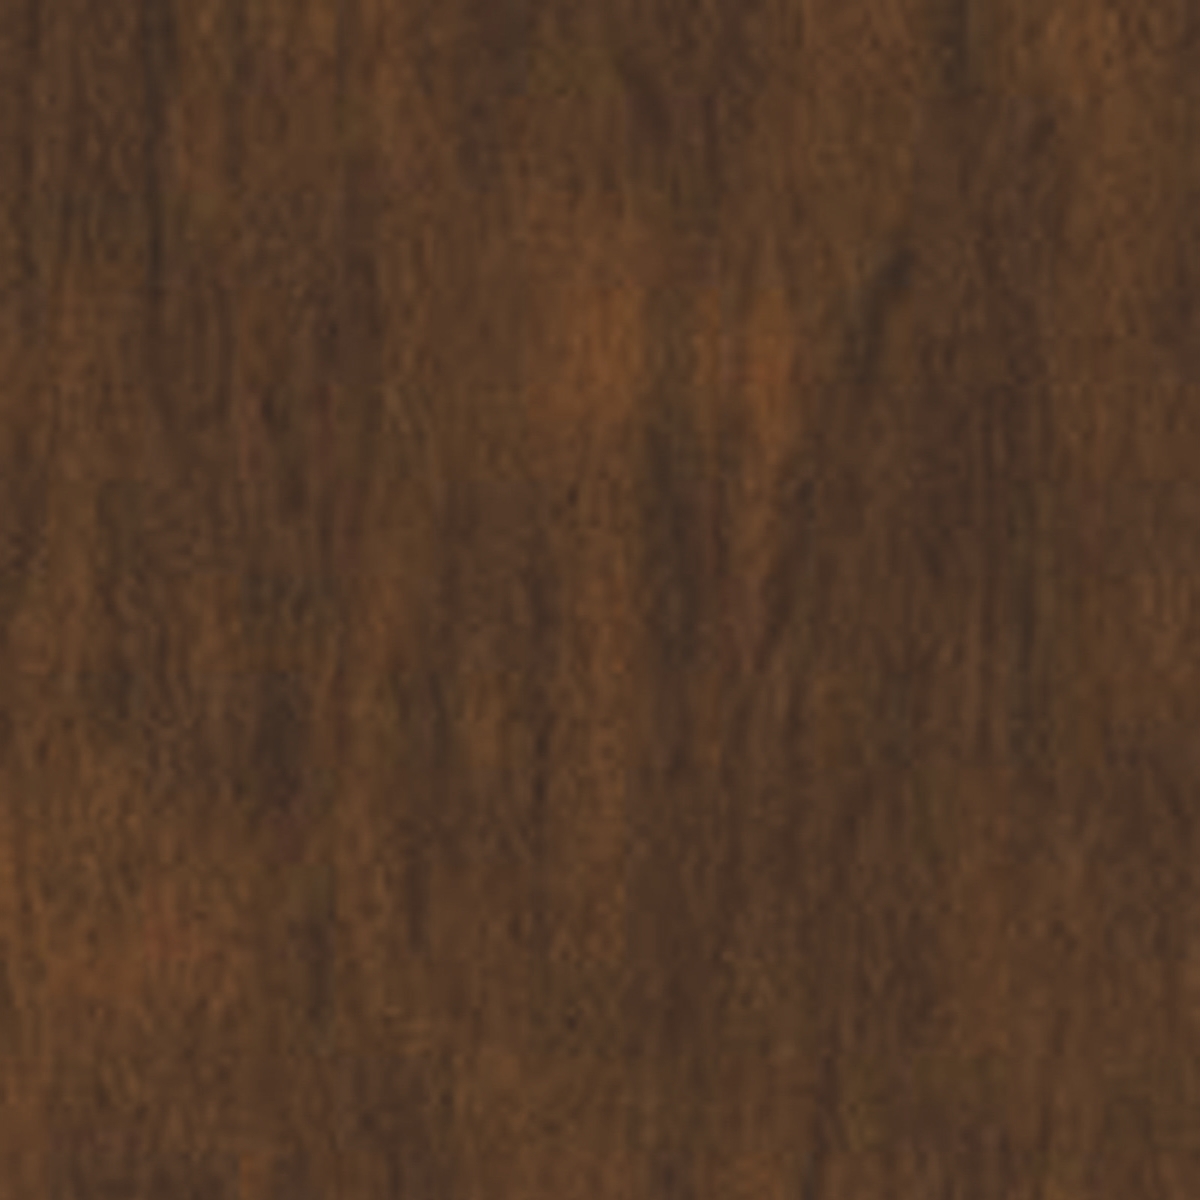 SW 3524 Chestnut stain color.